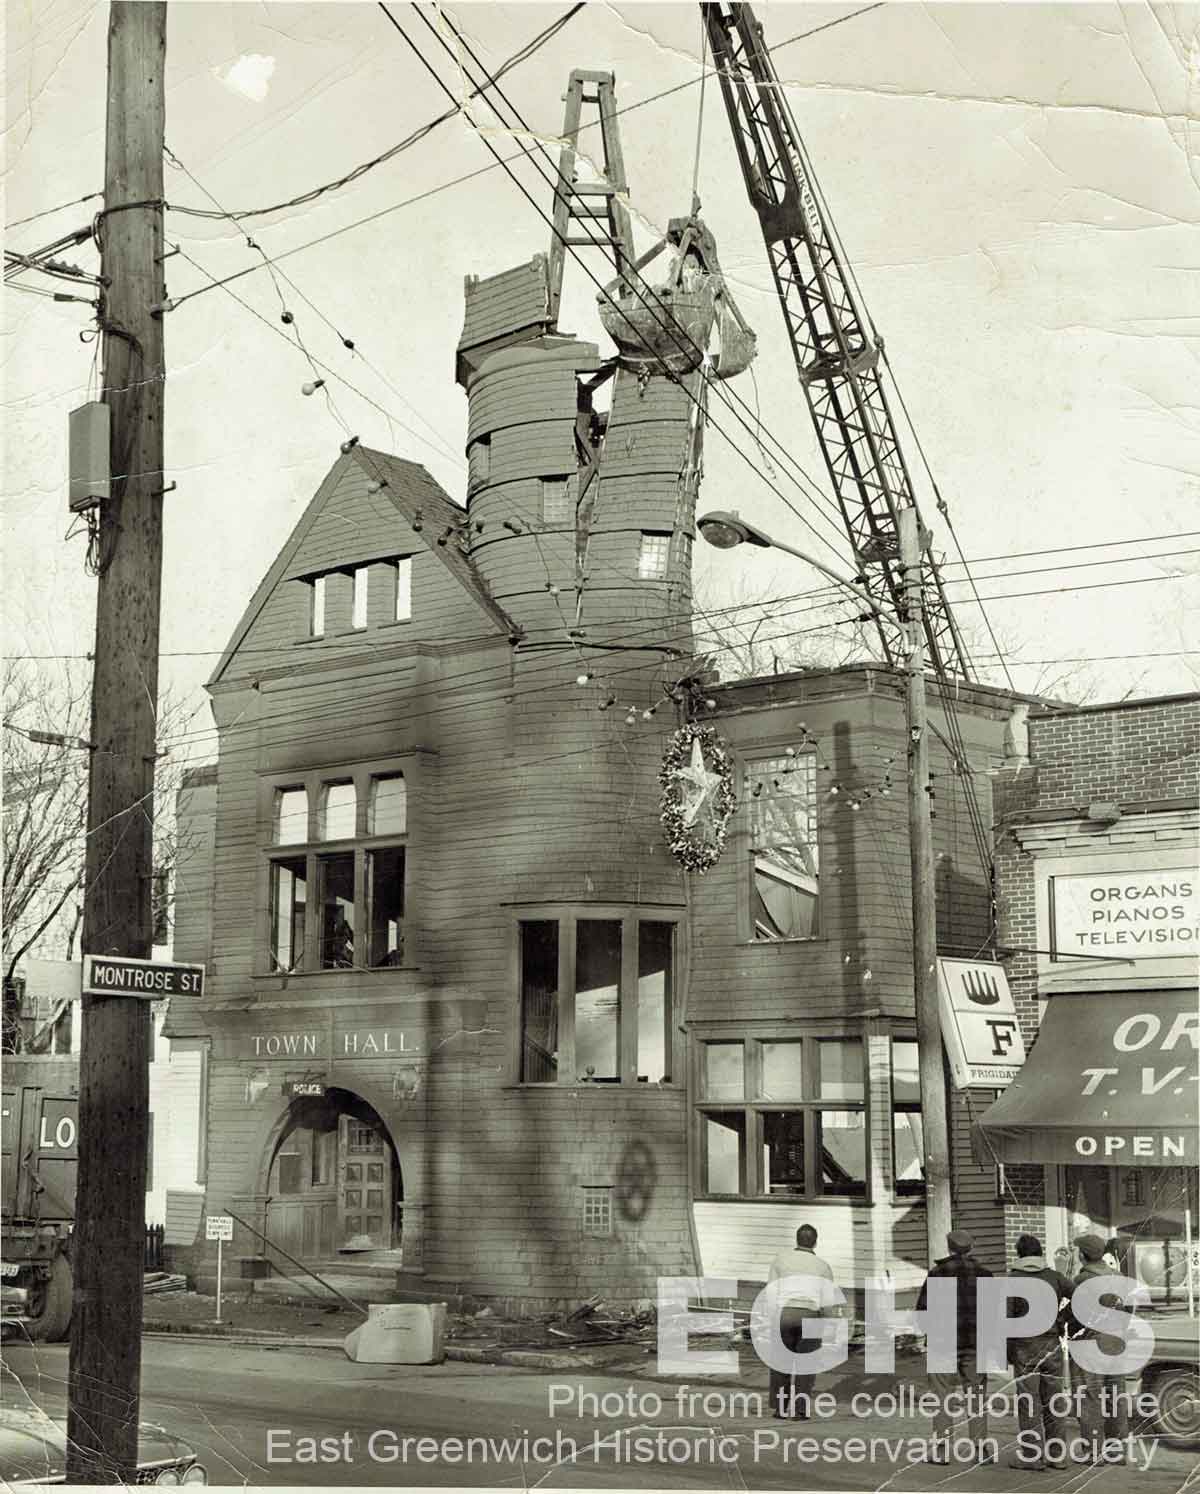 The Old East Greenwich Town Hall being demolished in December 1964.